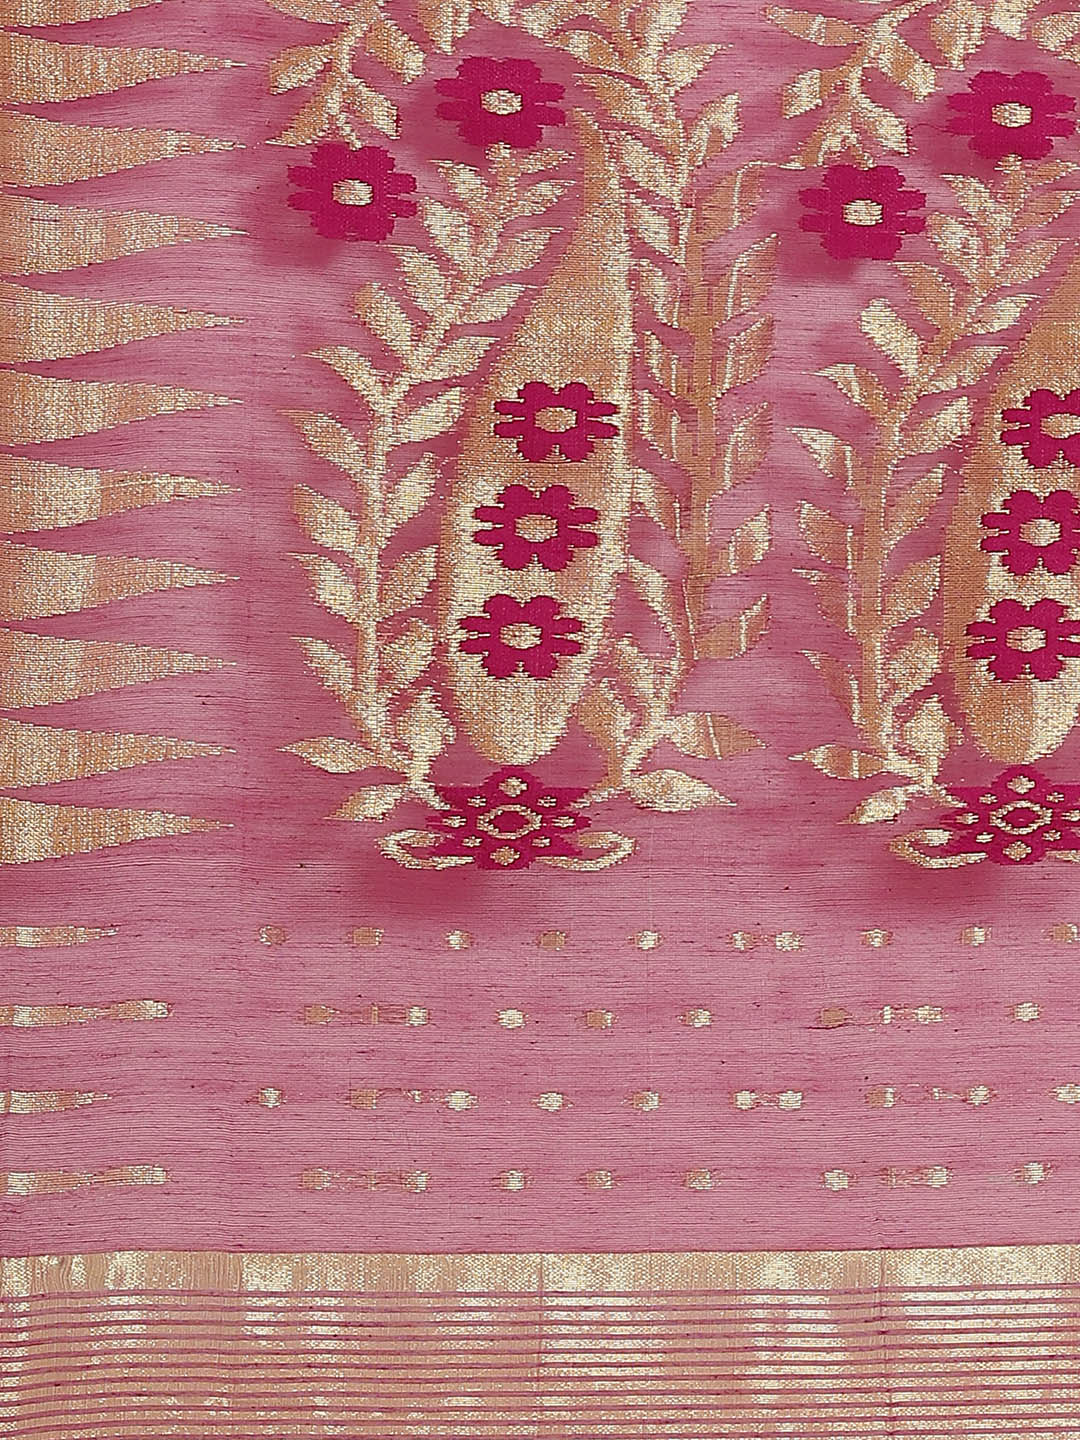 Purple and Gold, Kalakari India Jamdani Silk Cotton Woven Design Saree without blouse CHBHSA0039-Saree-Kalakari India-CHBHSA0039-Bengal, Geographical Indication, Hand Crafted, Hand Painted, Heritage Prints, Jamdani, Natural Dyes, Red, Sarees, Silk Blended, Sustainable Fabrics, Woven, Yellow-[Linen,Ethnic,wear,Fashionista,Handloom,Handicraft,Indigo,blockprint,block,print,Cotton,Chanderi,Blue, latest,classy,party,bollywood,trendy,summer,style,traditional,formal,elegant,unique,style,hand,block,prin